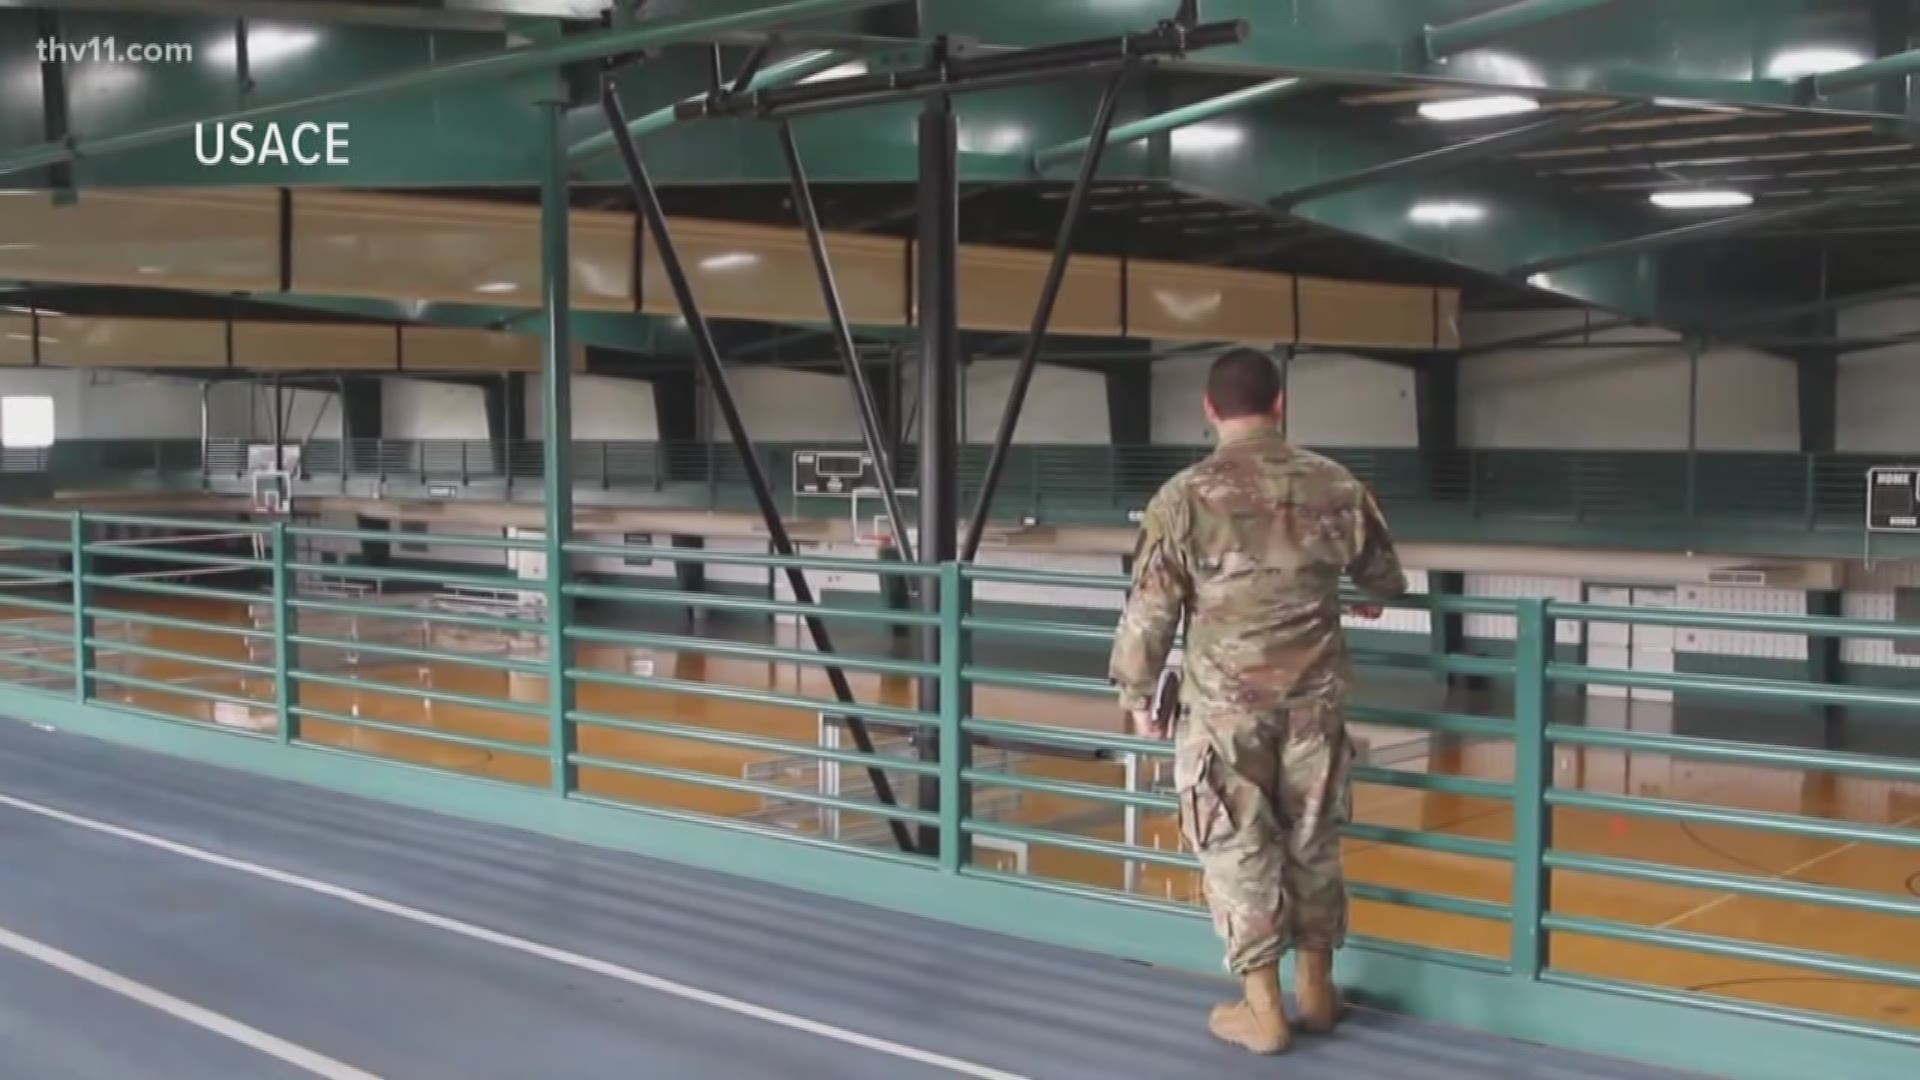 A huge concern in hot spots across the nation is the possibility of running out of hospital beds. The military is helping to make sure that won't happen in Arkansas.